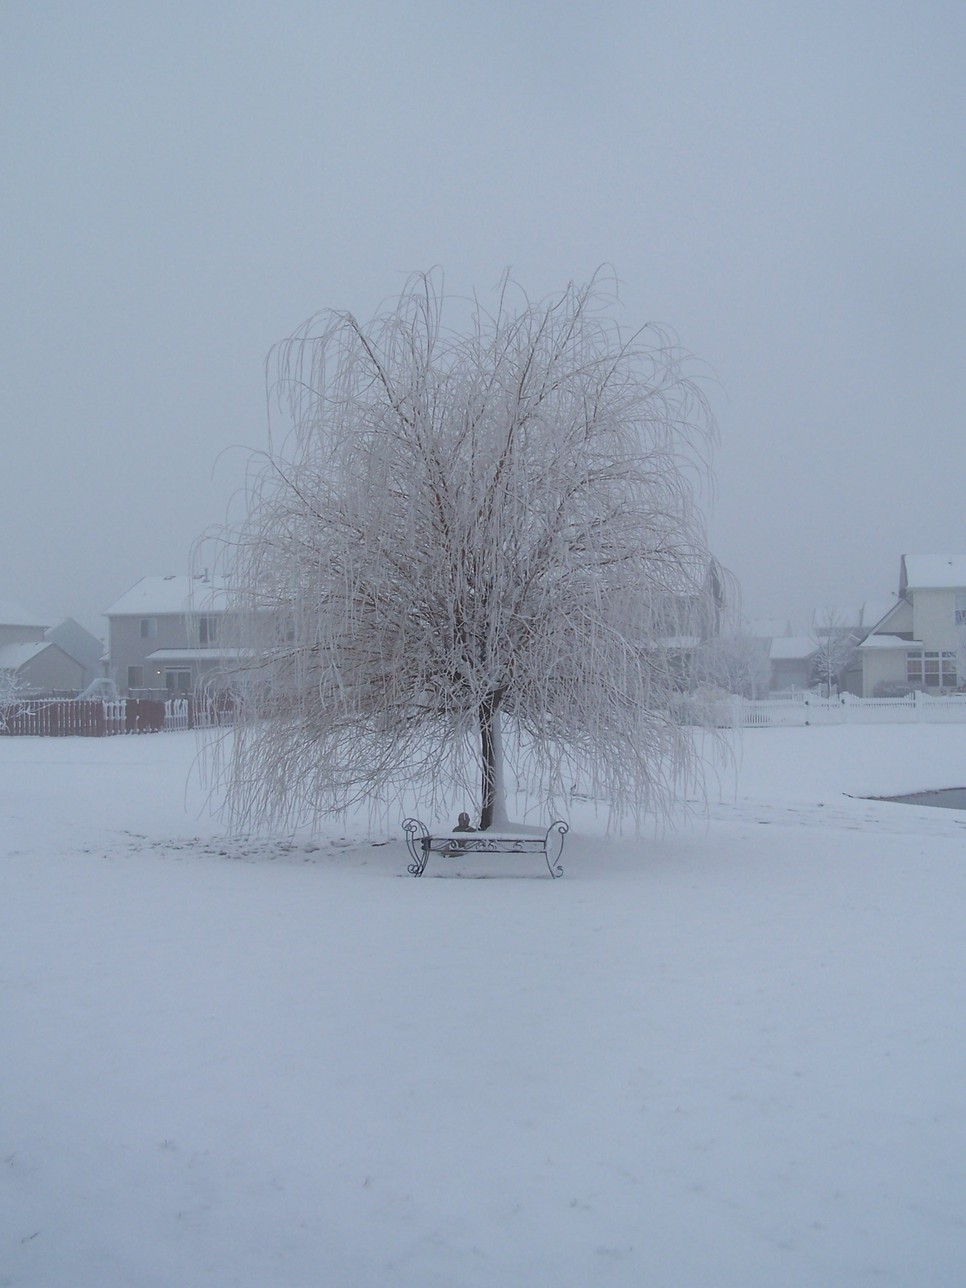 Shorewood, IL: Willow tree in the winter